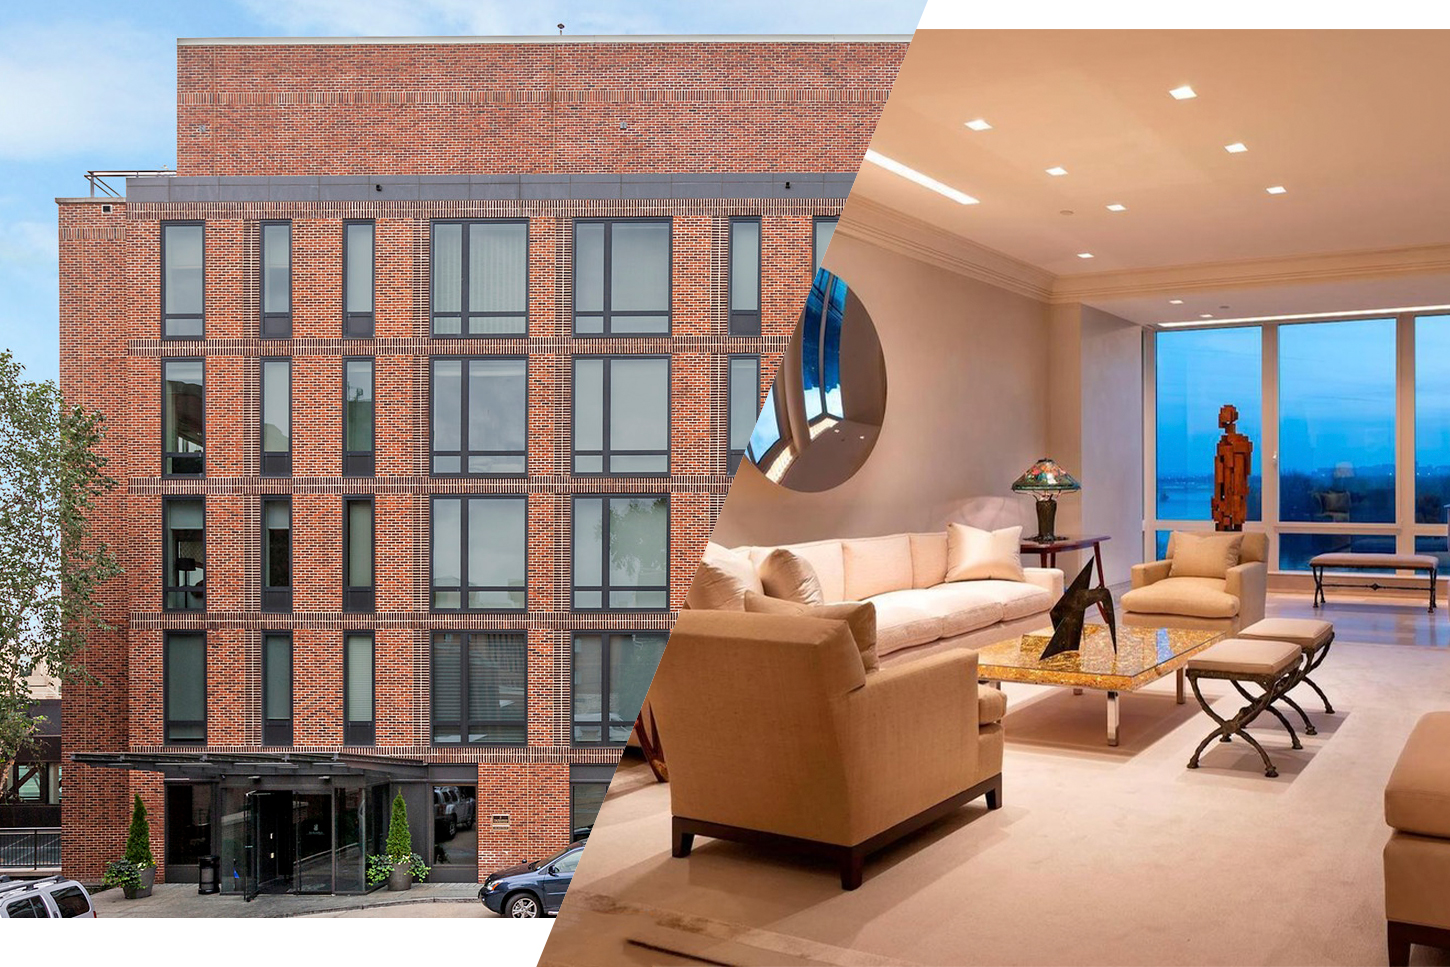 The penthouse at 3150 South Street in Washington, D.C. (Photos via Redfin; Homevisit)